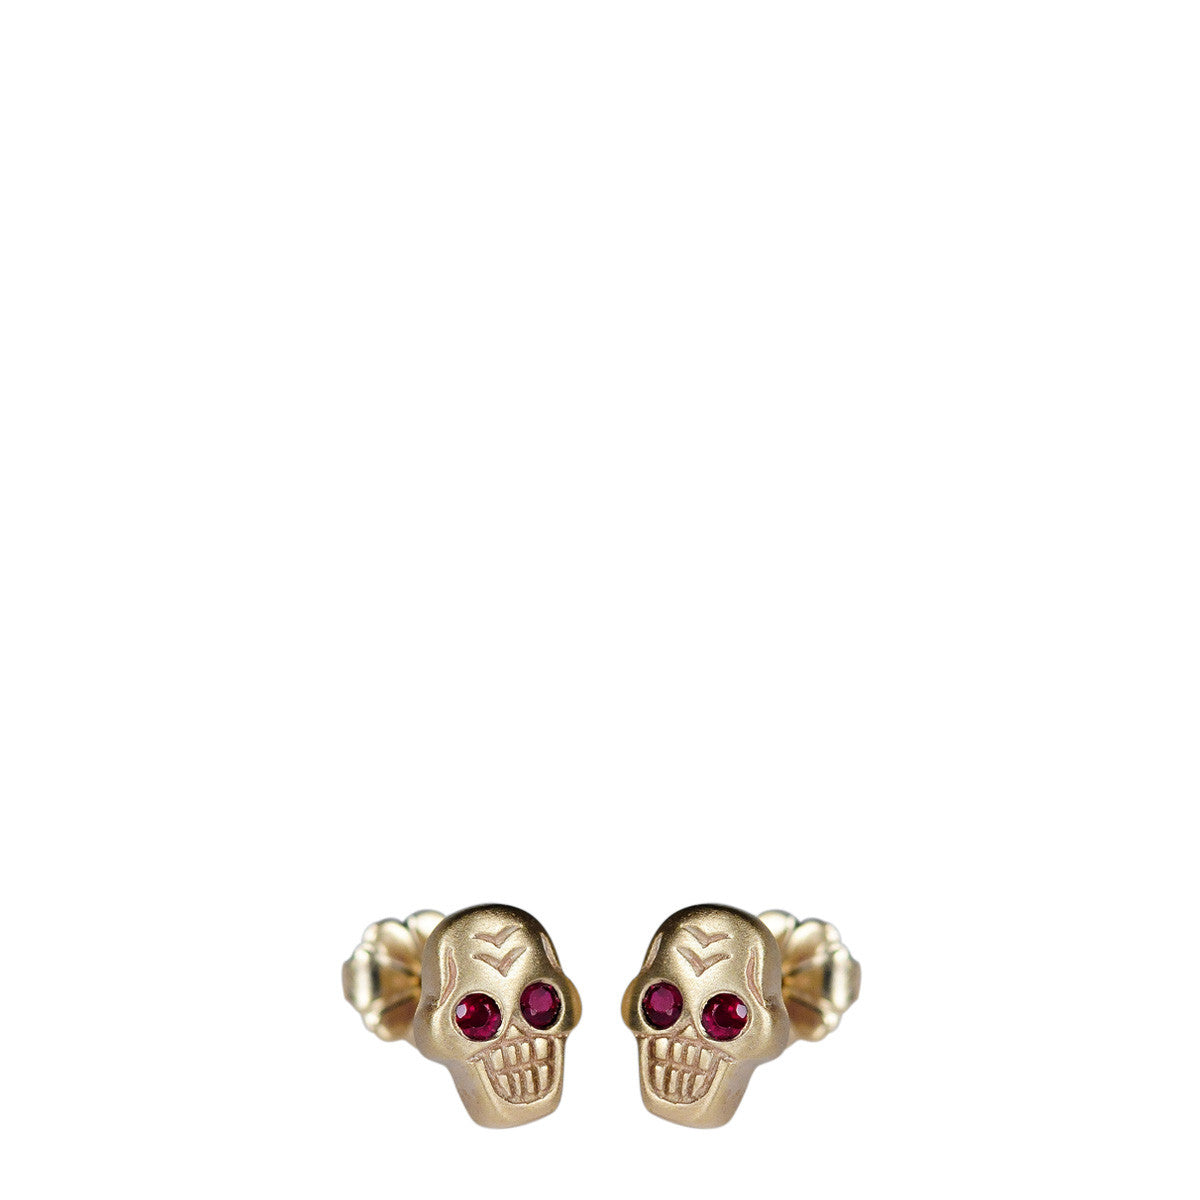 10K Gold Tiny Skull Stud Earrings with Rubies